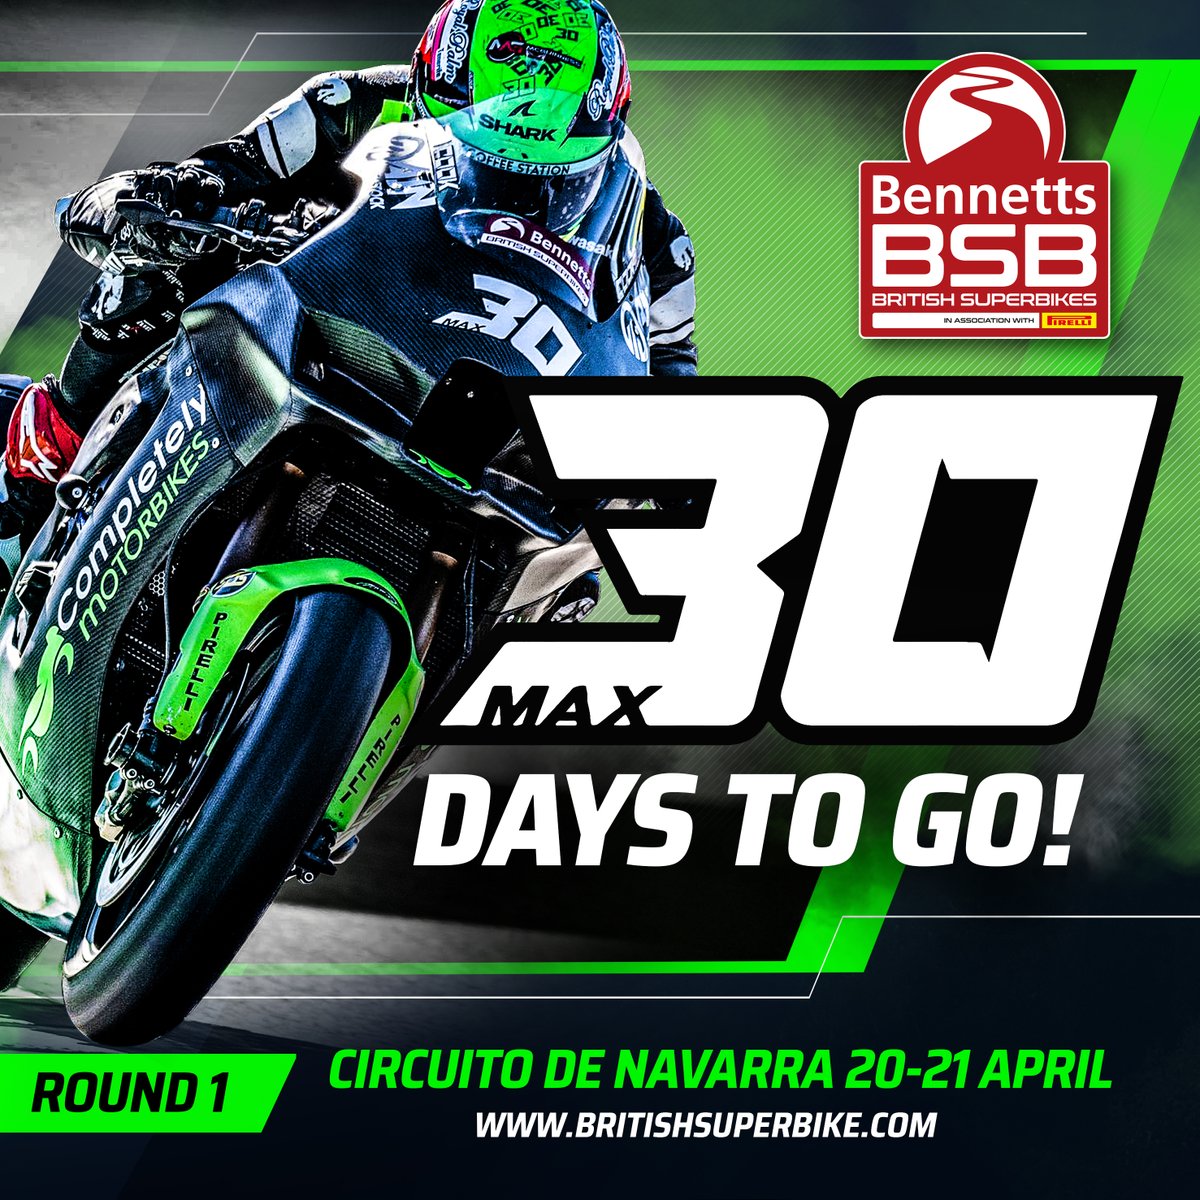 The @bennetts_bike BSB season opener is getting closer! 30 days to wait now until the first round of the season at @CircuitoNavarra @MaxCook_30 | @cmkawasaki Ticket information for our UK fans travelling to Circuito de Navarra➡️ bit.ly/3O6wt6E #NavarraBSB